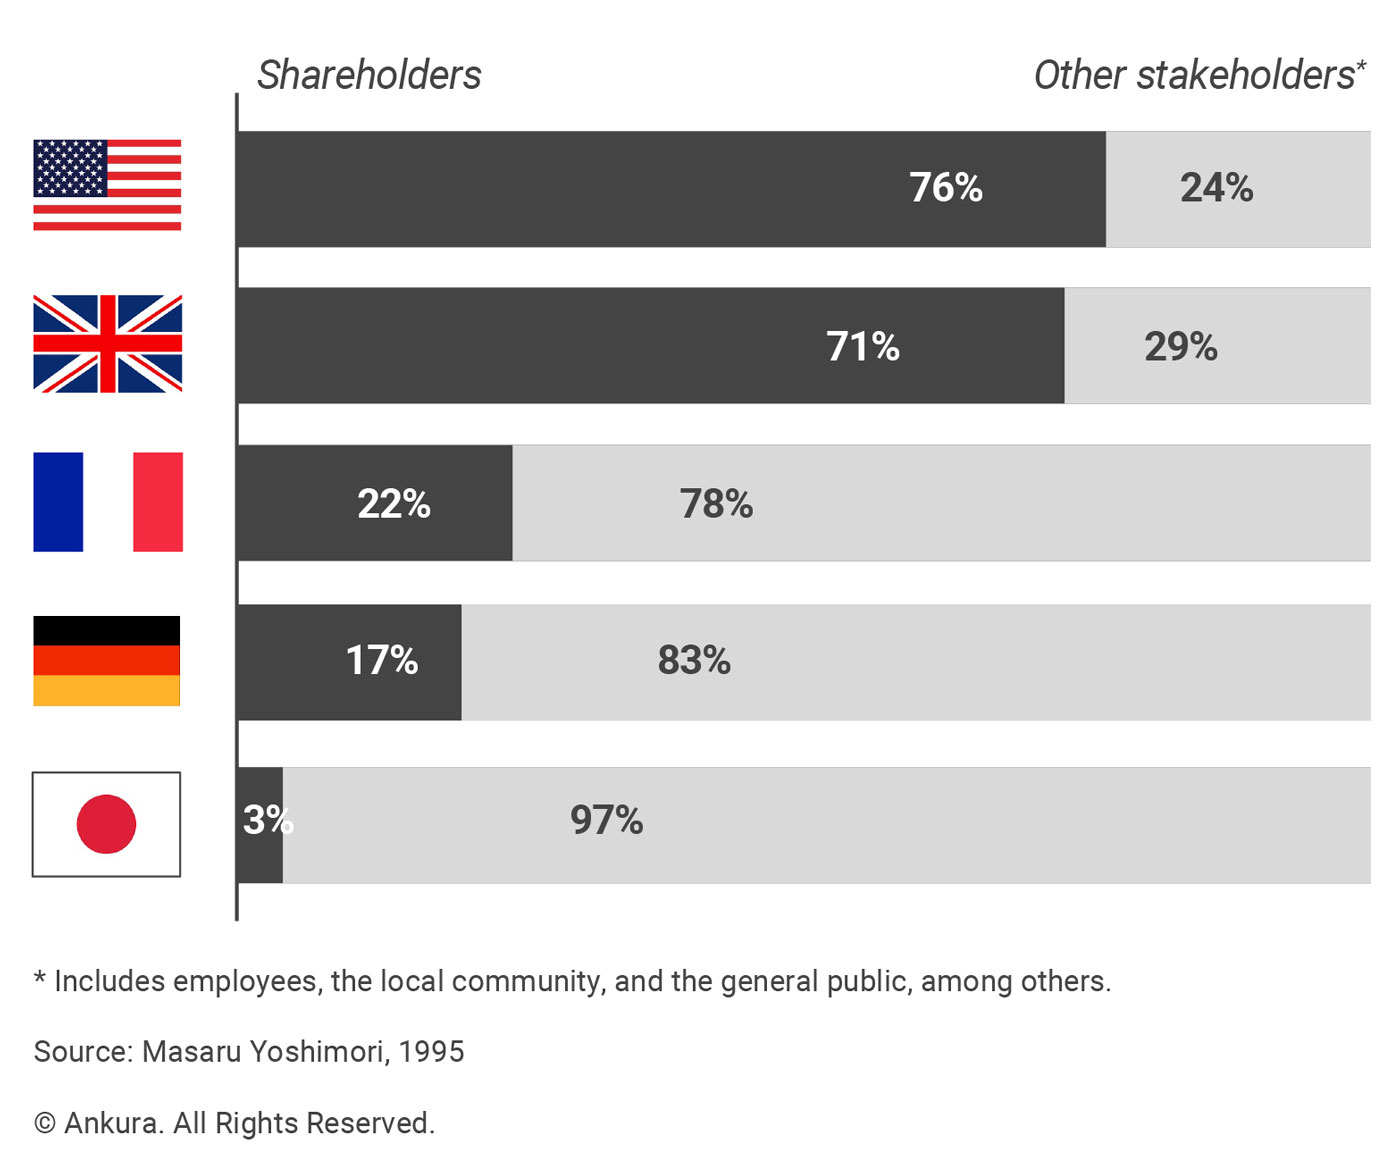 Exhibit 2: Whose Firm Is It?
National views on whether a Board should promote the shareholder’s vs. other stakeholders’ interests